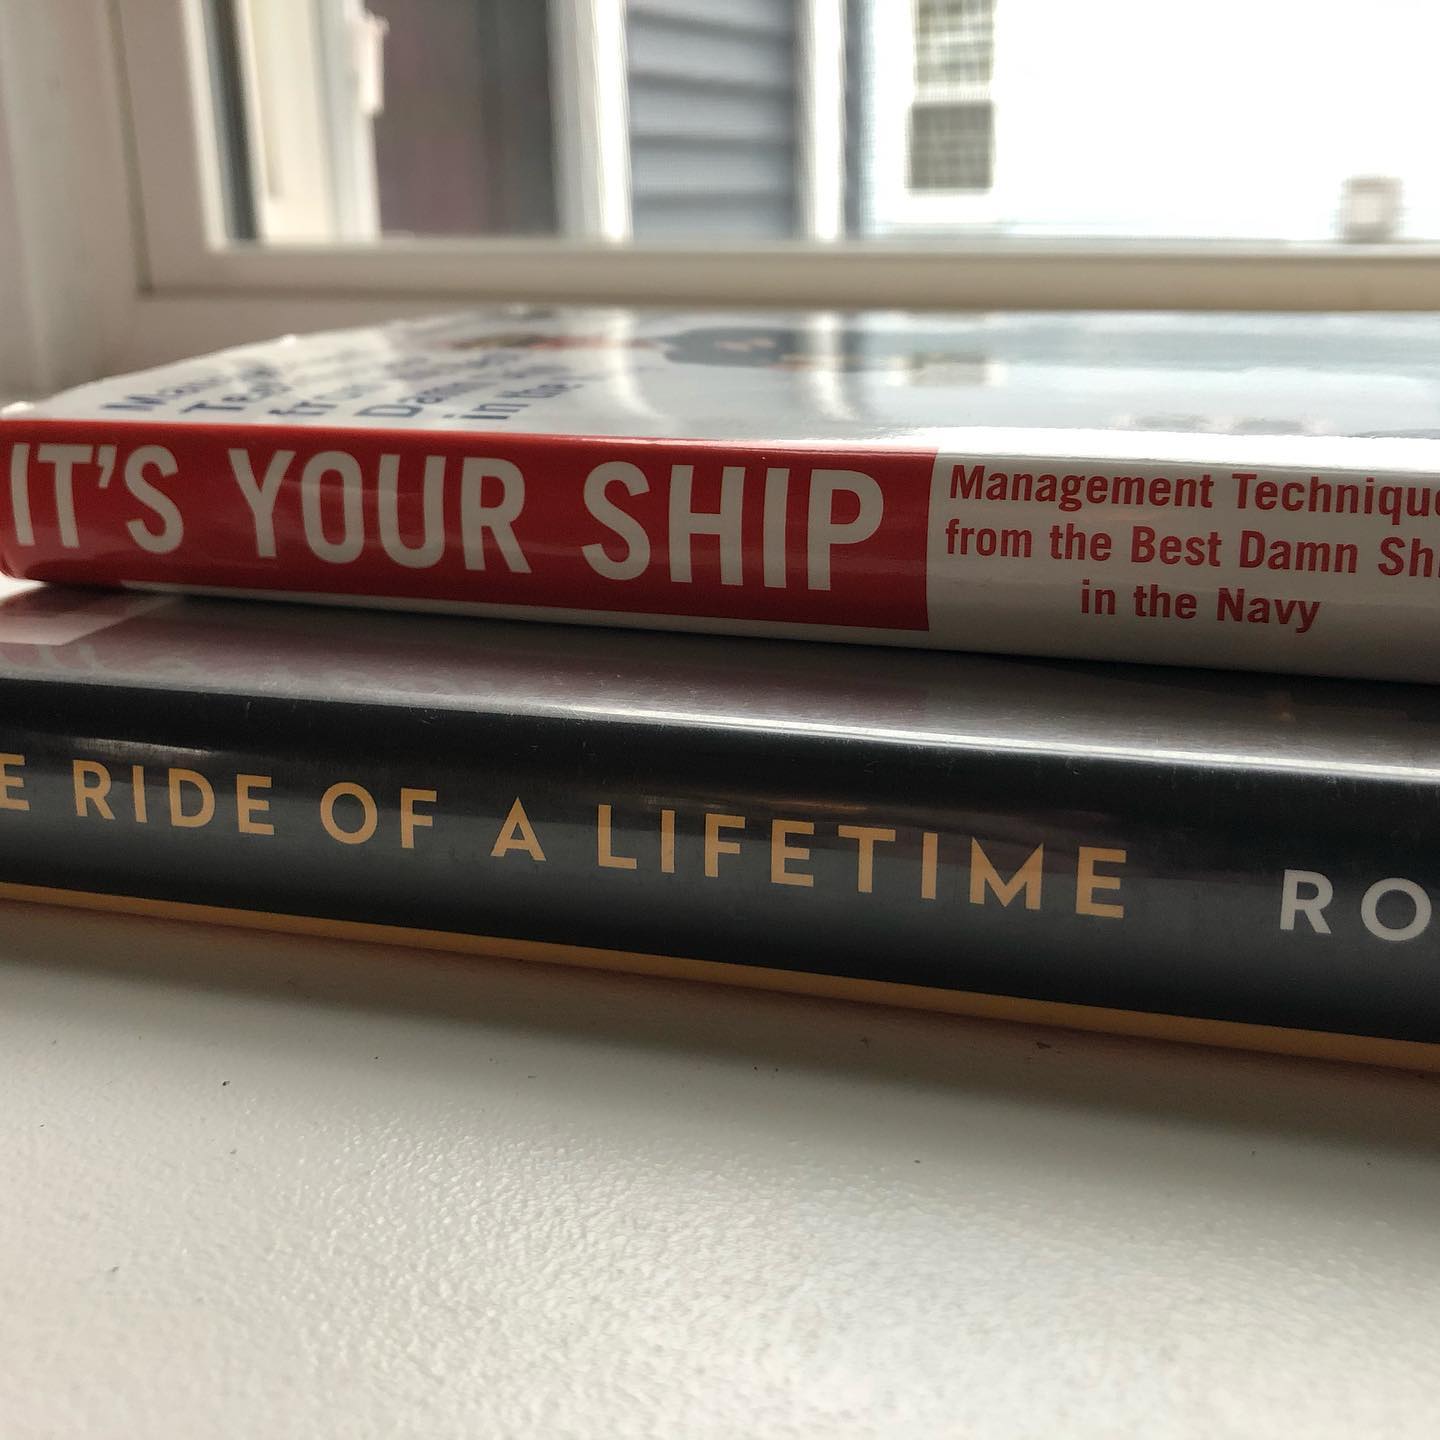 Knowledge is power!  This week, I’m reading “It’s Your Ship – Management Techniques from the Best Damn Ship in the Navy.”